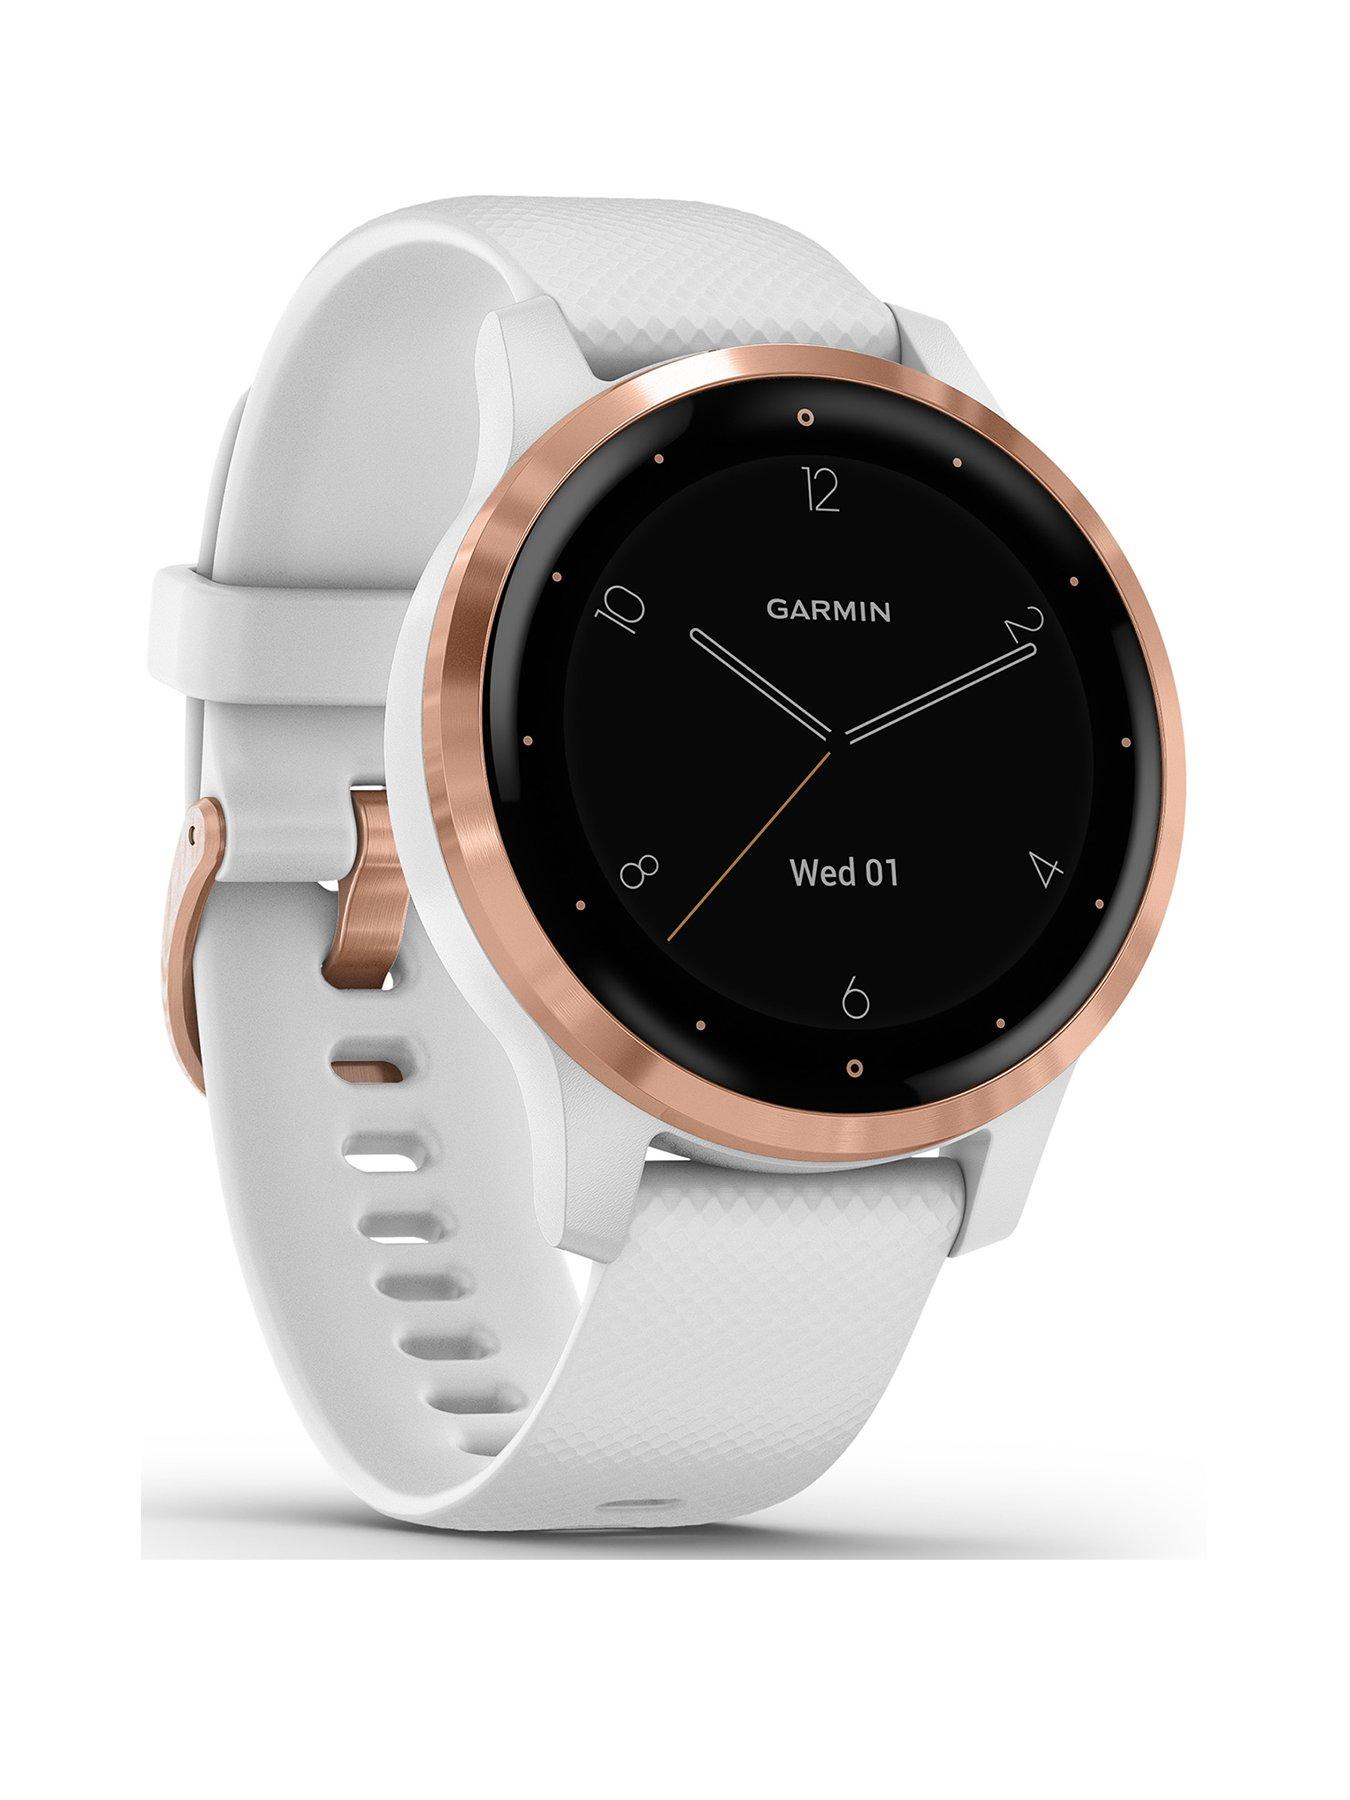 Vivoactive 4S Smaller-Sized GPS Smartwatch, Features Music, Body Energy  Monitoring, Animated Workouts, Pulse Ox Sensors and More